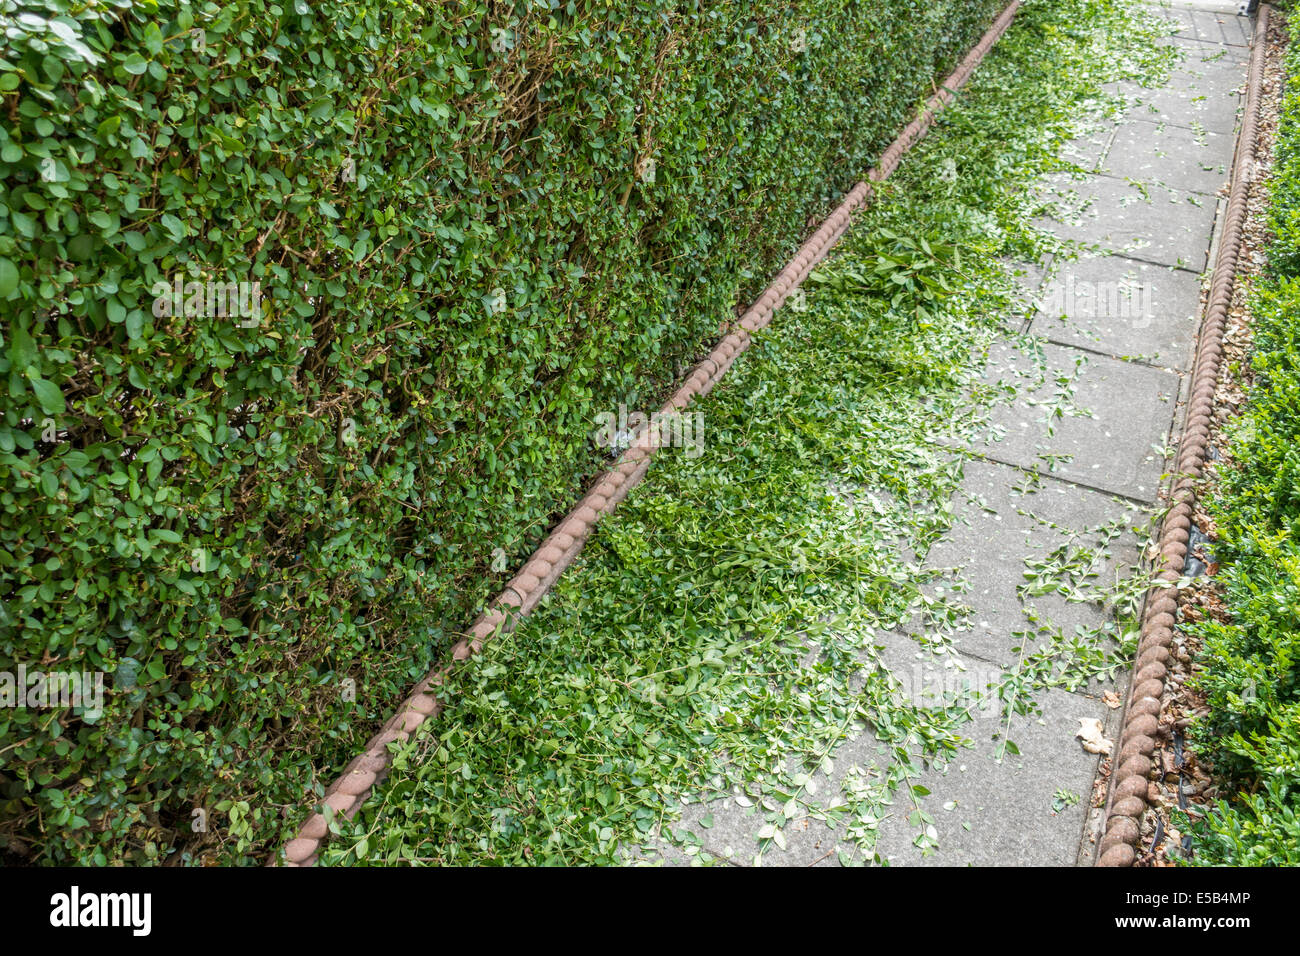 Hedge trimmings below a newly trimmed privet hedge in an urban front garden with electric hedge trimmer Stock Photo